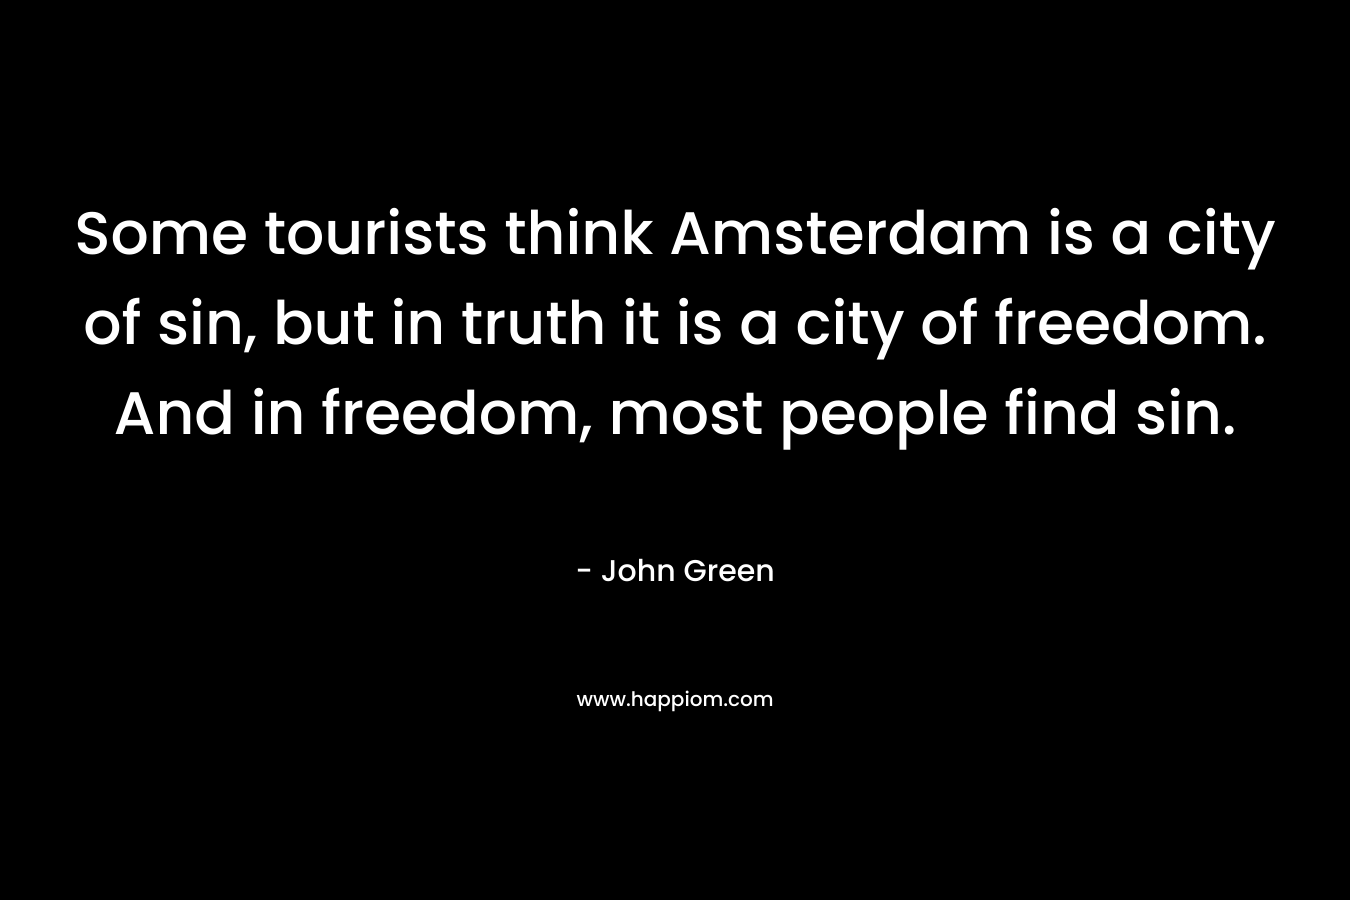 Some tourists think Amsterdam is a city of sin, but in truth it is a city of freedom. And in freedom, most people find sin. – John Green